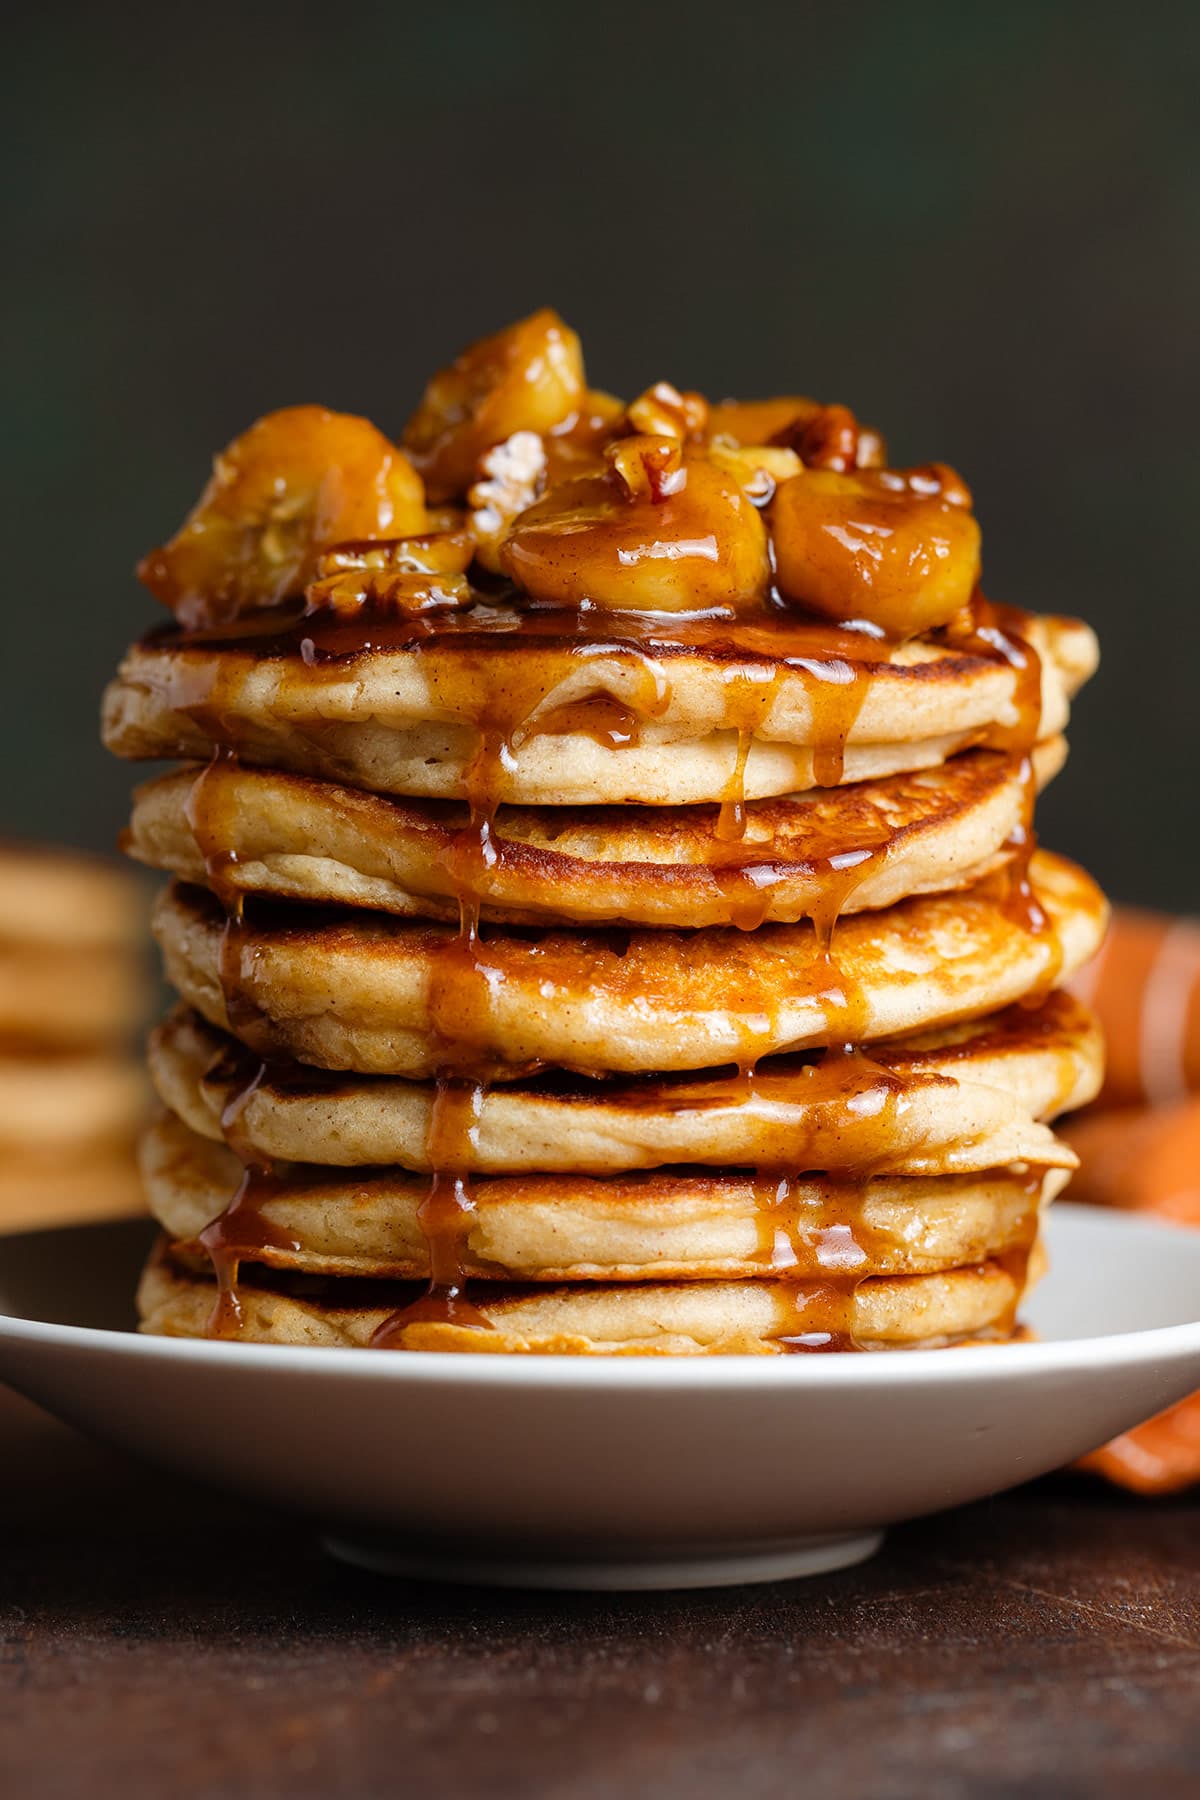 A stack of pancakes with caramelized bananas and pecans with caramel sauce dripping down the sides.